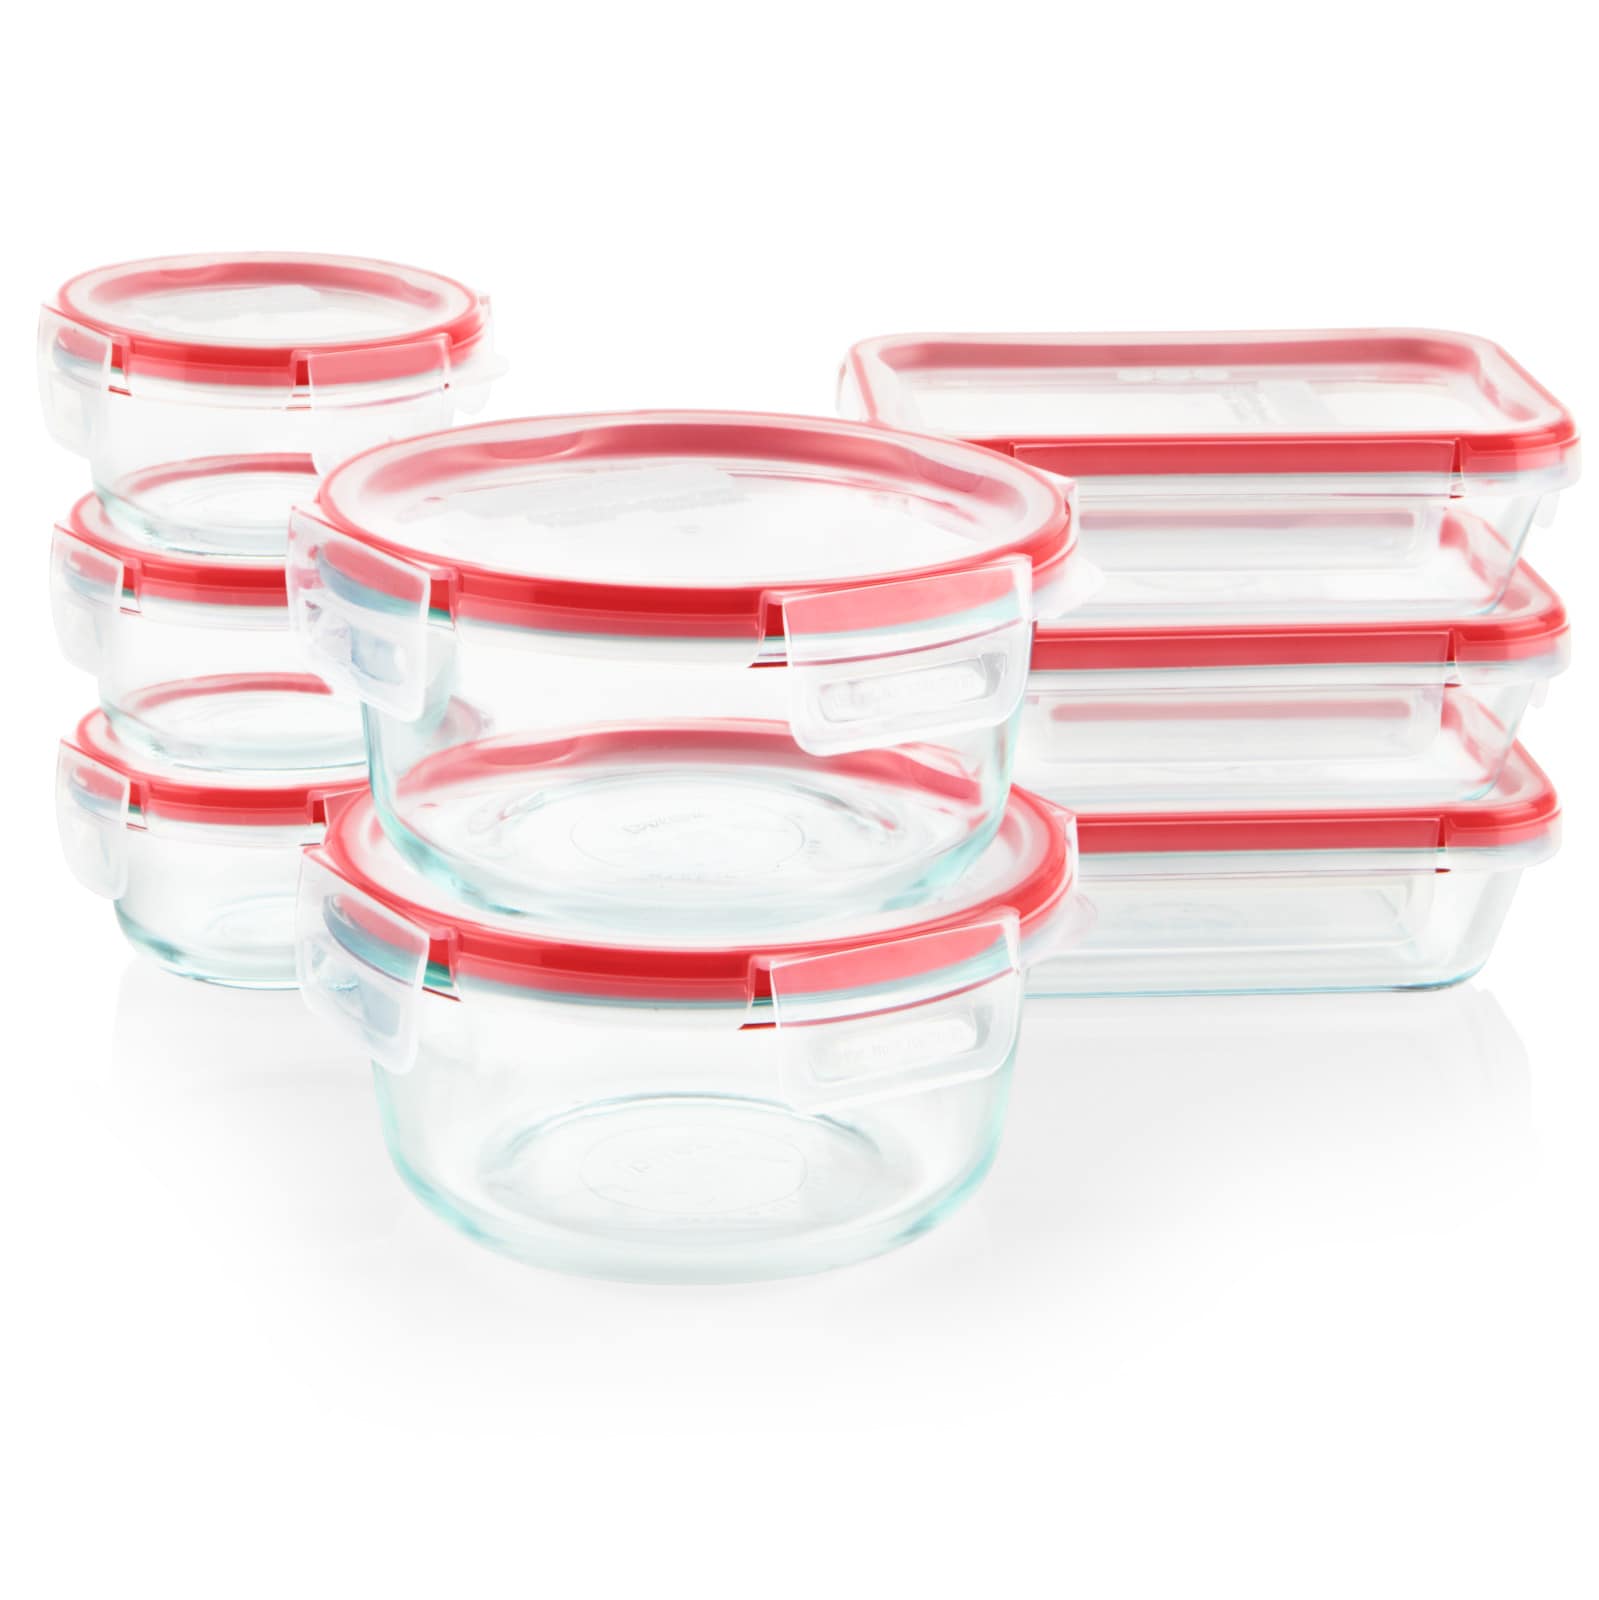 Glasslock 7-Pack Multisize Glass Bpa-free Reusable Food Storage